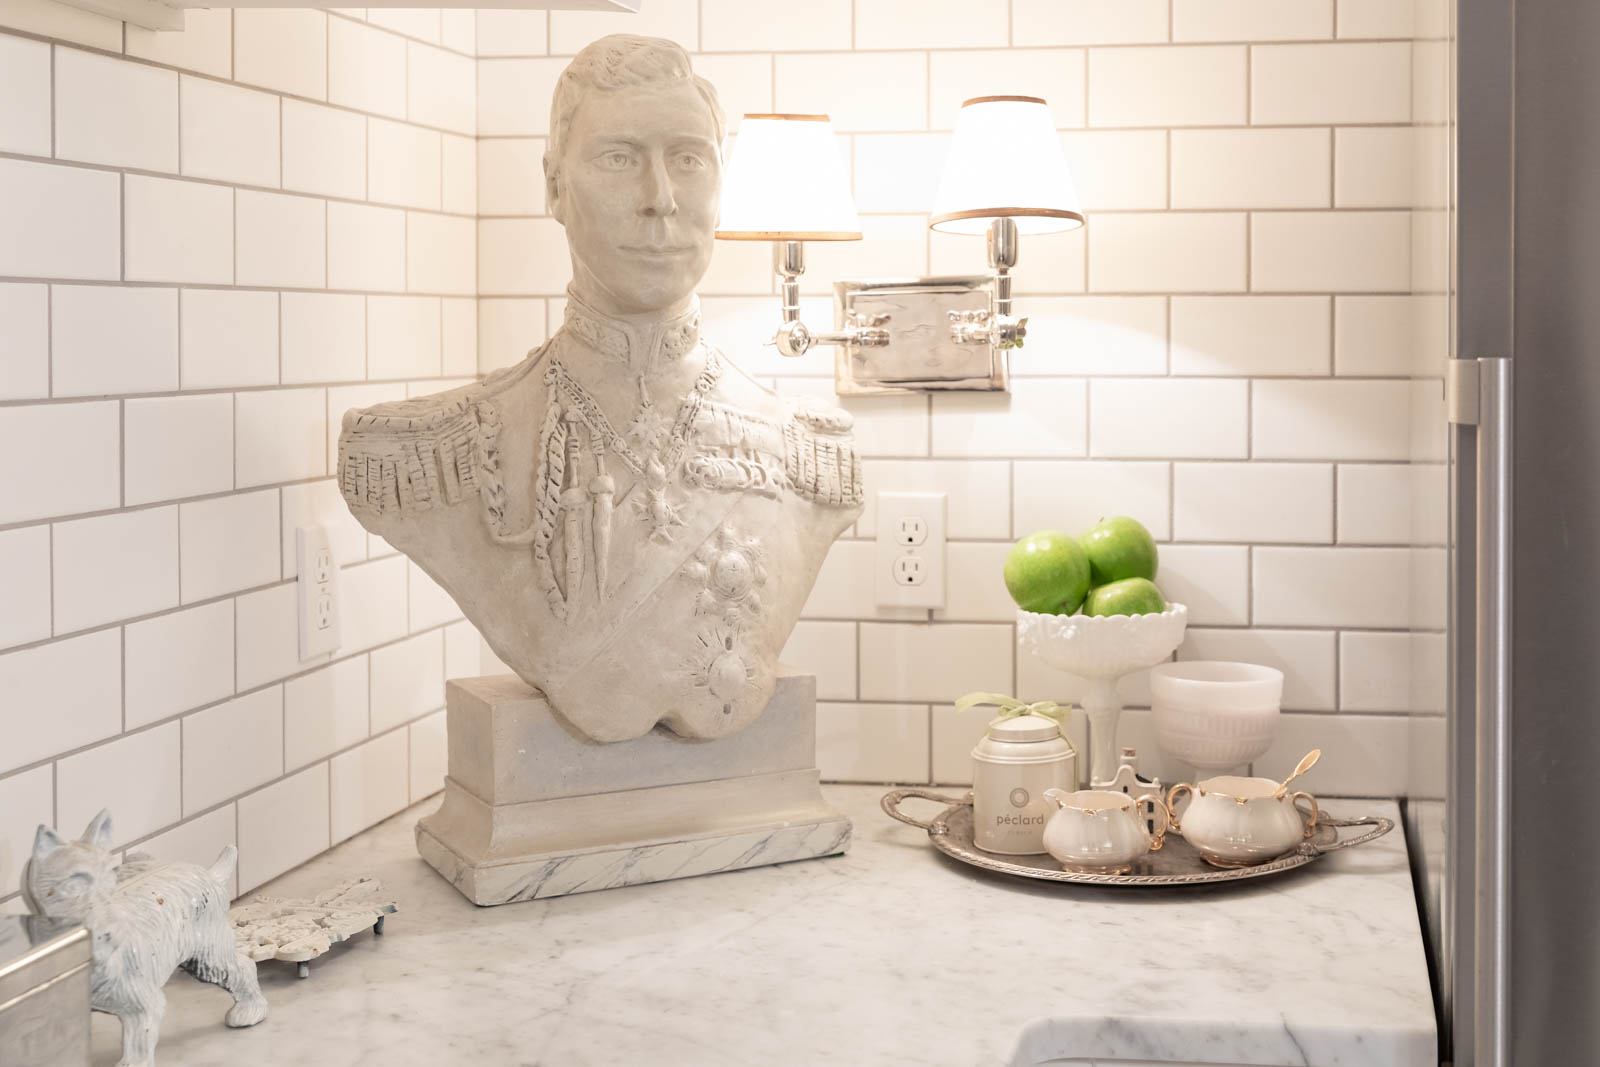 A bust of King George VI appears in the basement kitchen